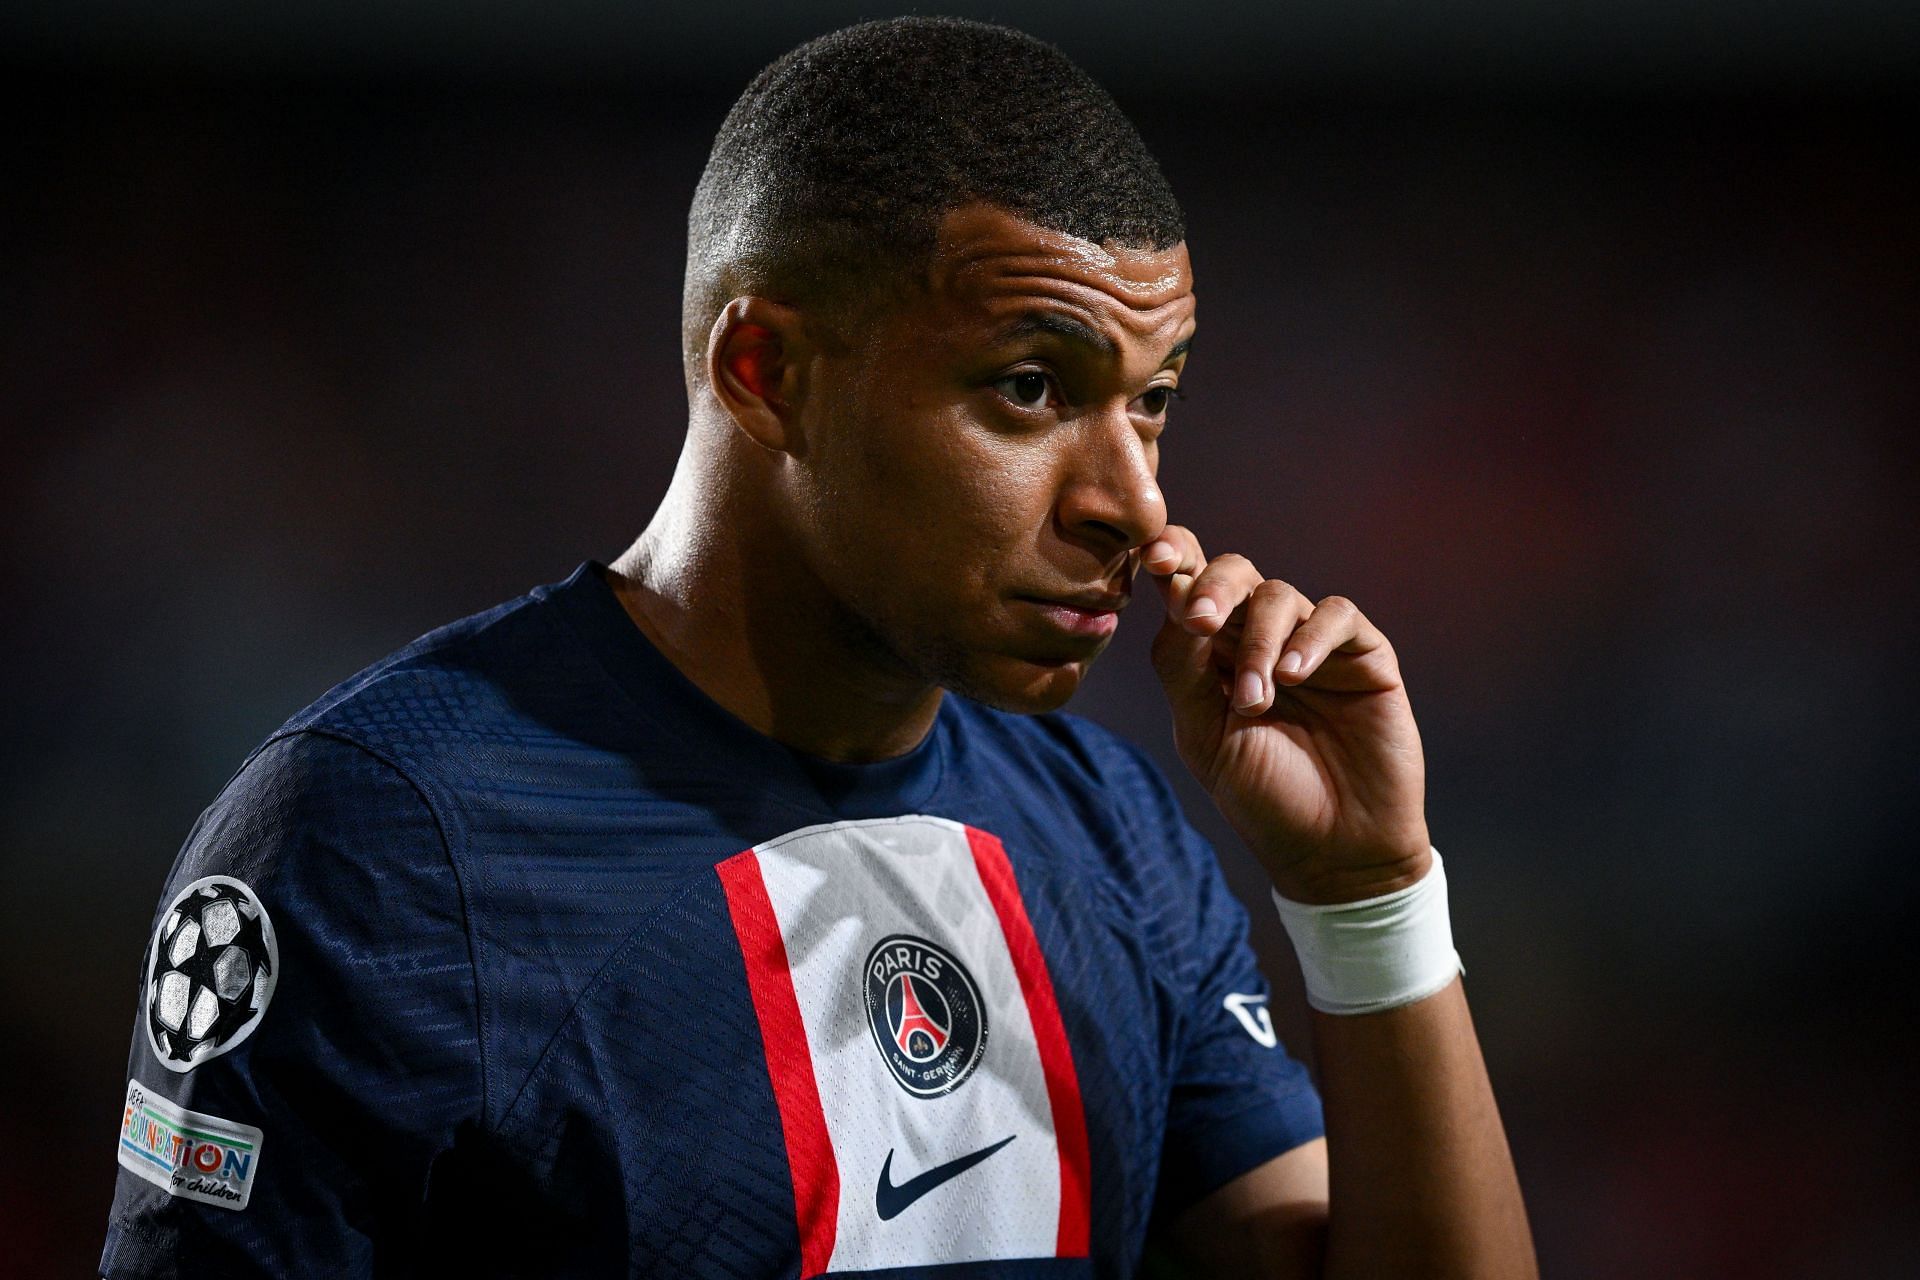  Kylian Mbappe seems frustrated at the Parc des Princes